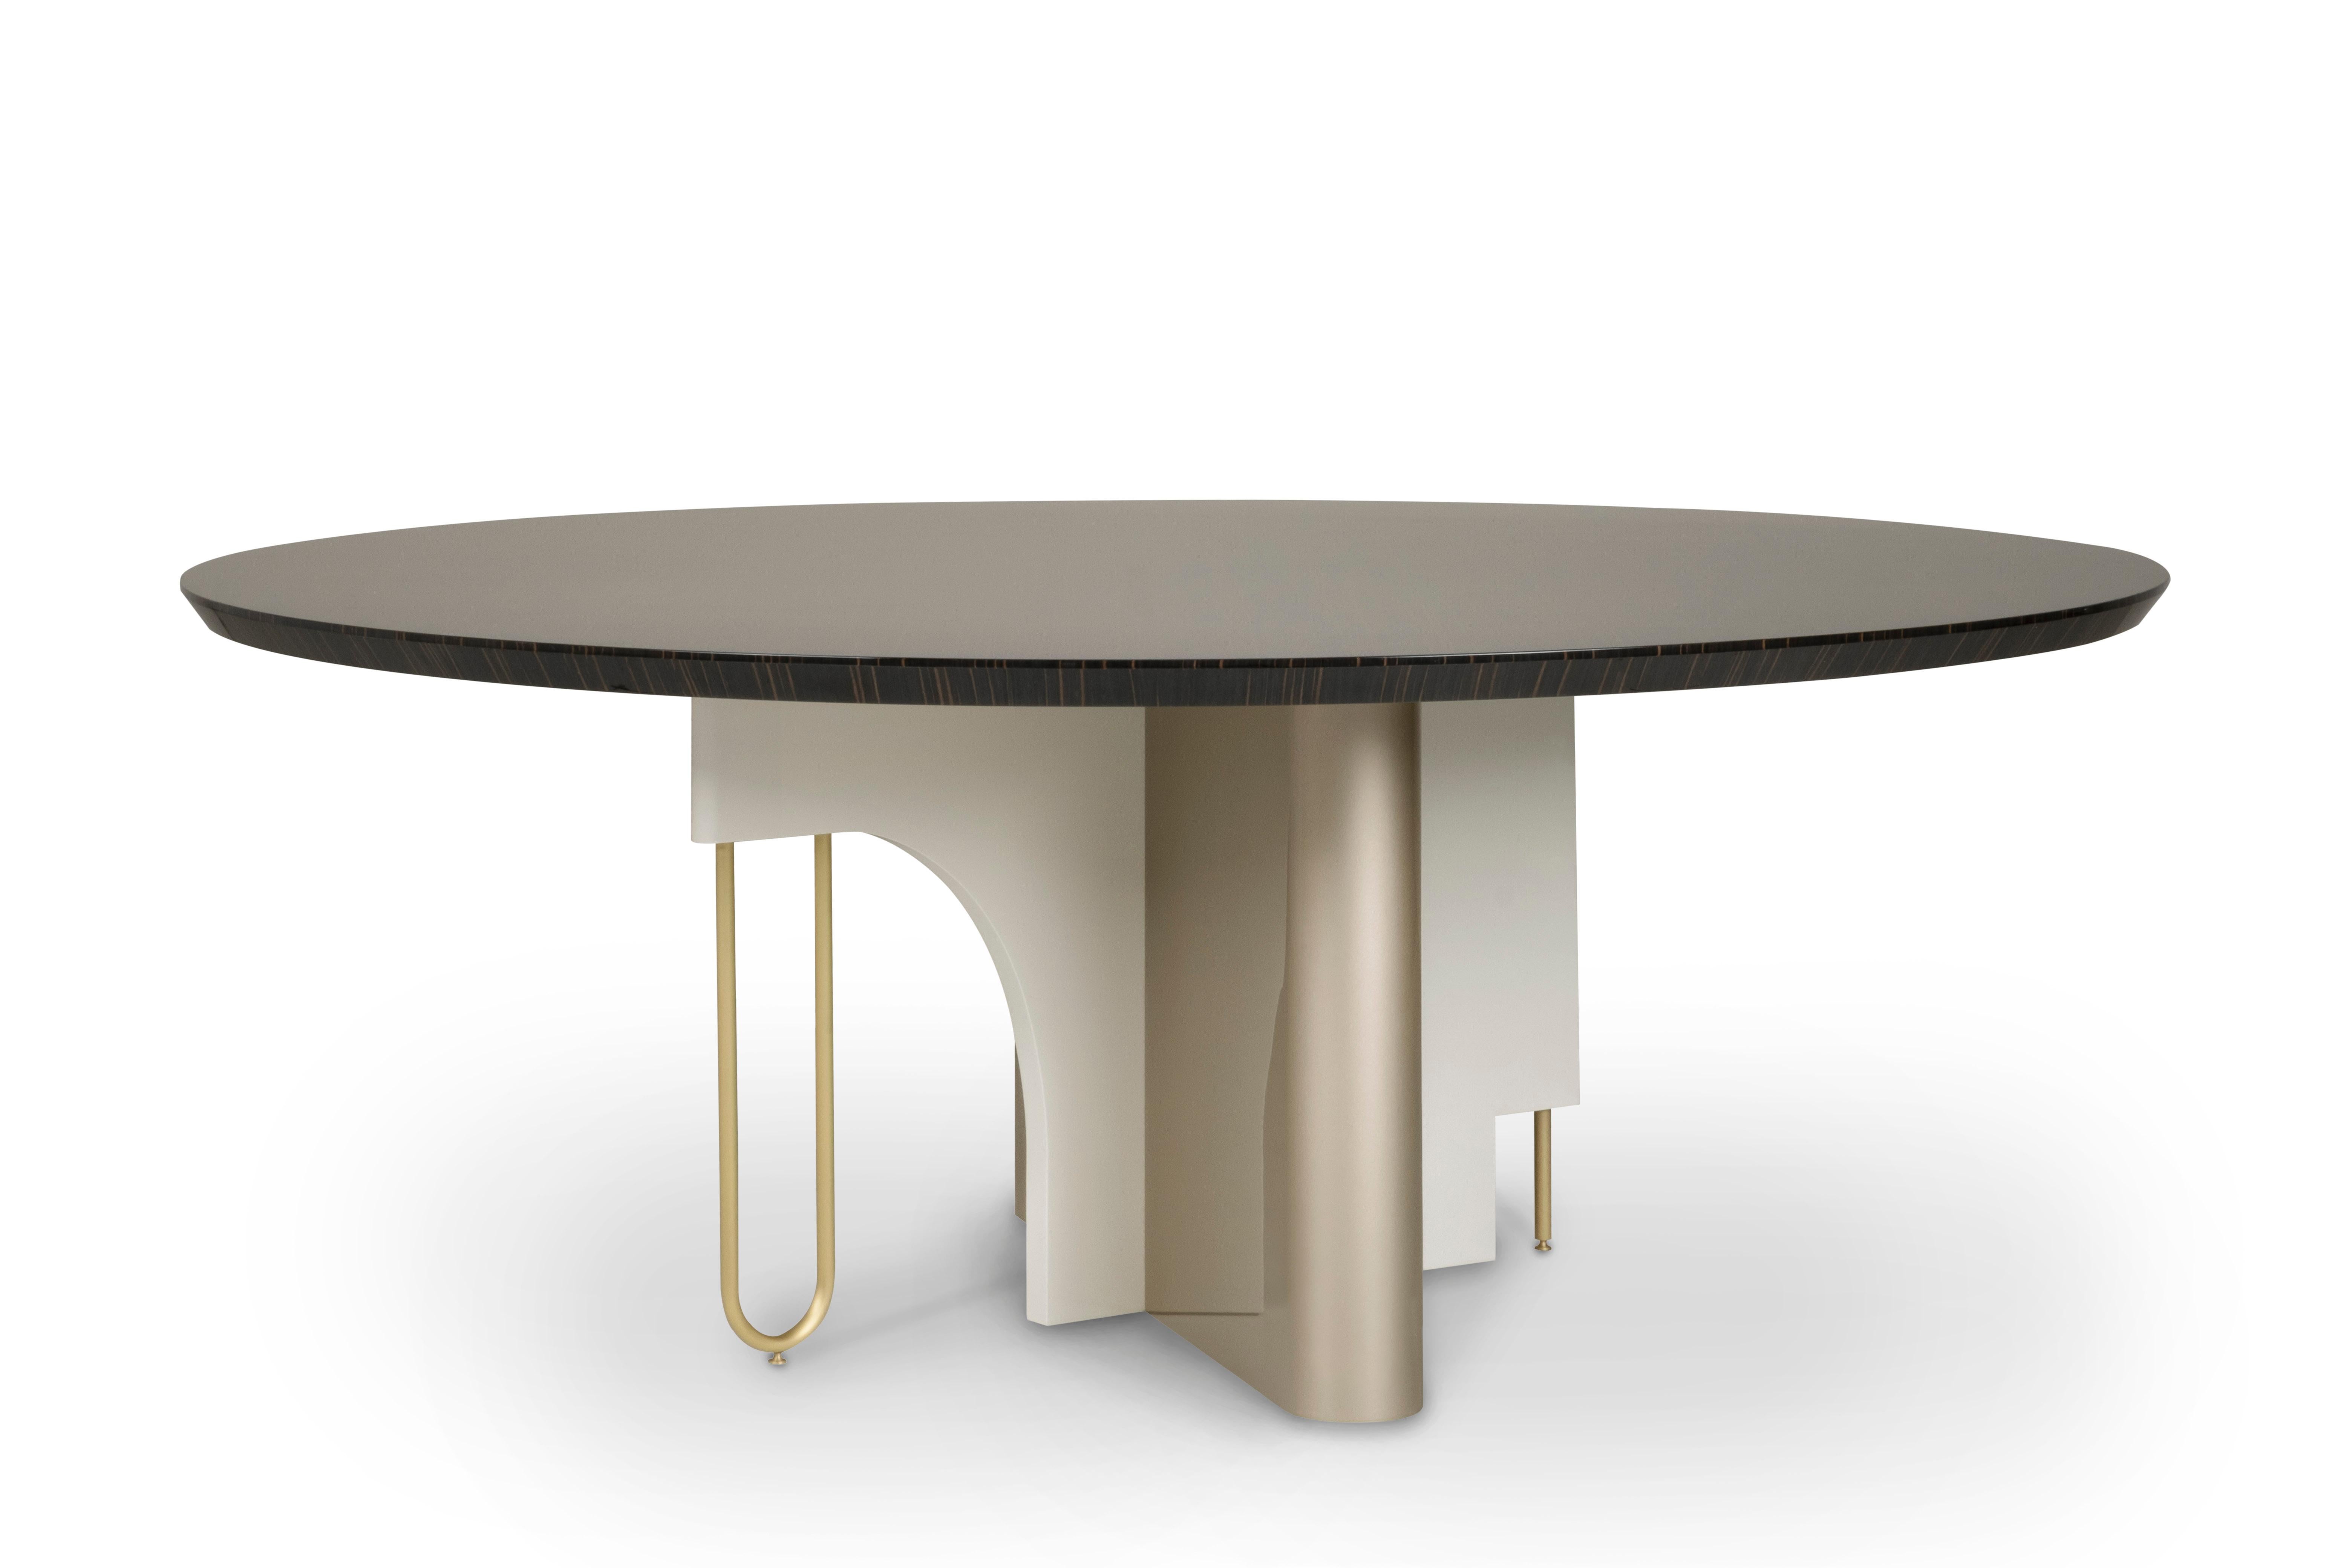 Ferreirinha Dining Table, Contemporary Collection, Handcrafted in Portugal - Europe by Greenapple.

The Ferreirinha wood dining table pays homage to the lasting legacy of Antónia Adelaide Ferreira, a visionary businesswoman who defied the